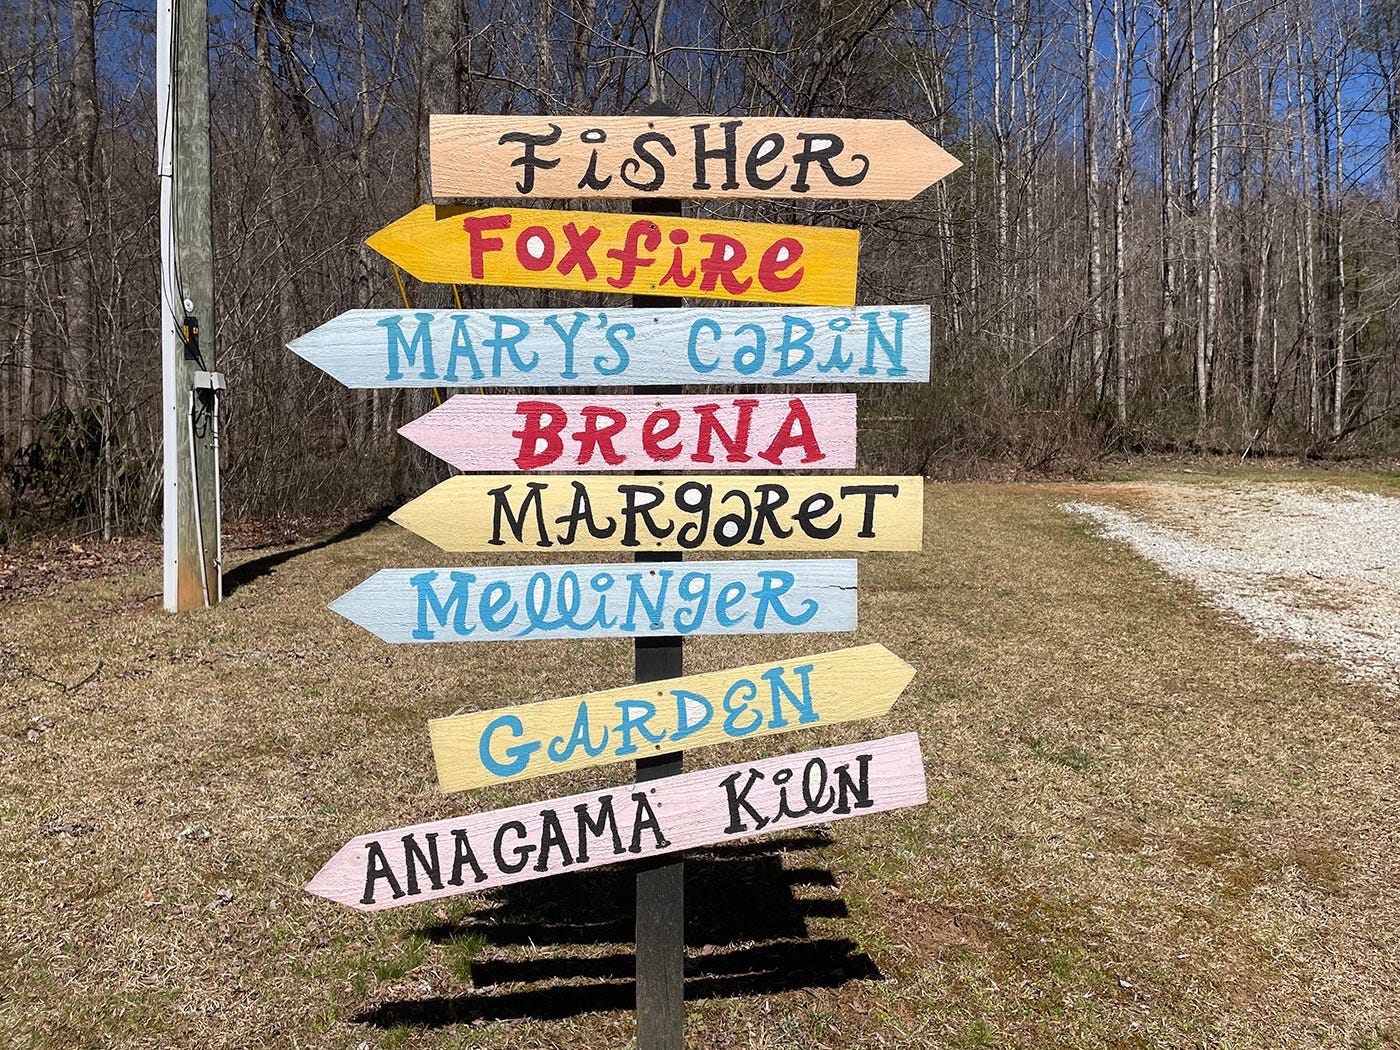 An image of signs leading up to the cabins at the Hambidge Center, an artist residency in Rabun Gap, GA